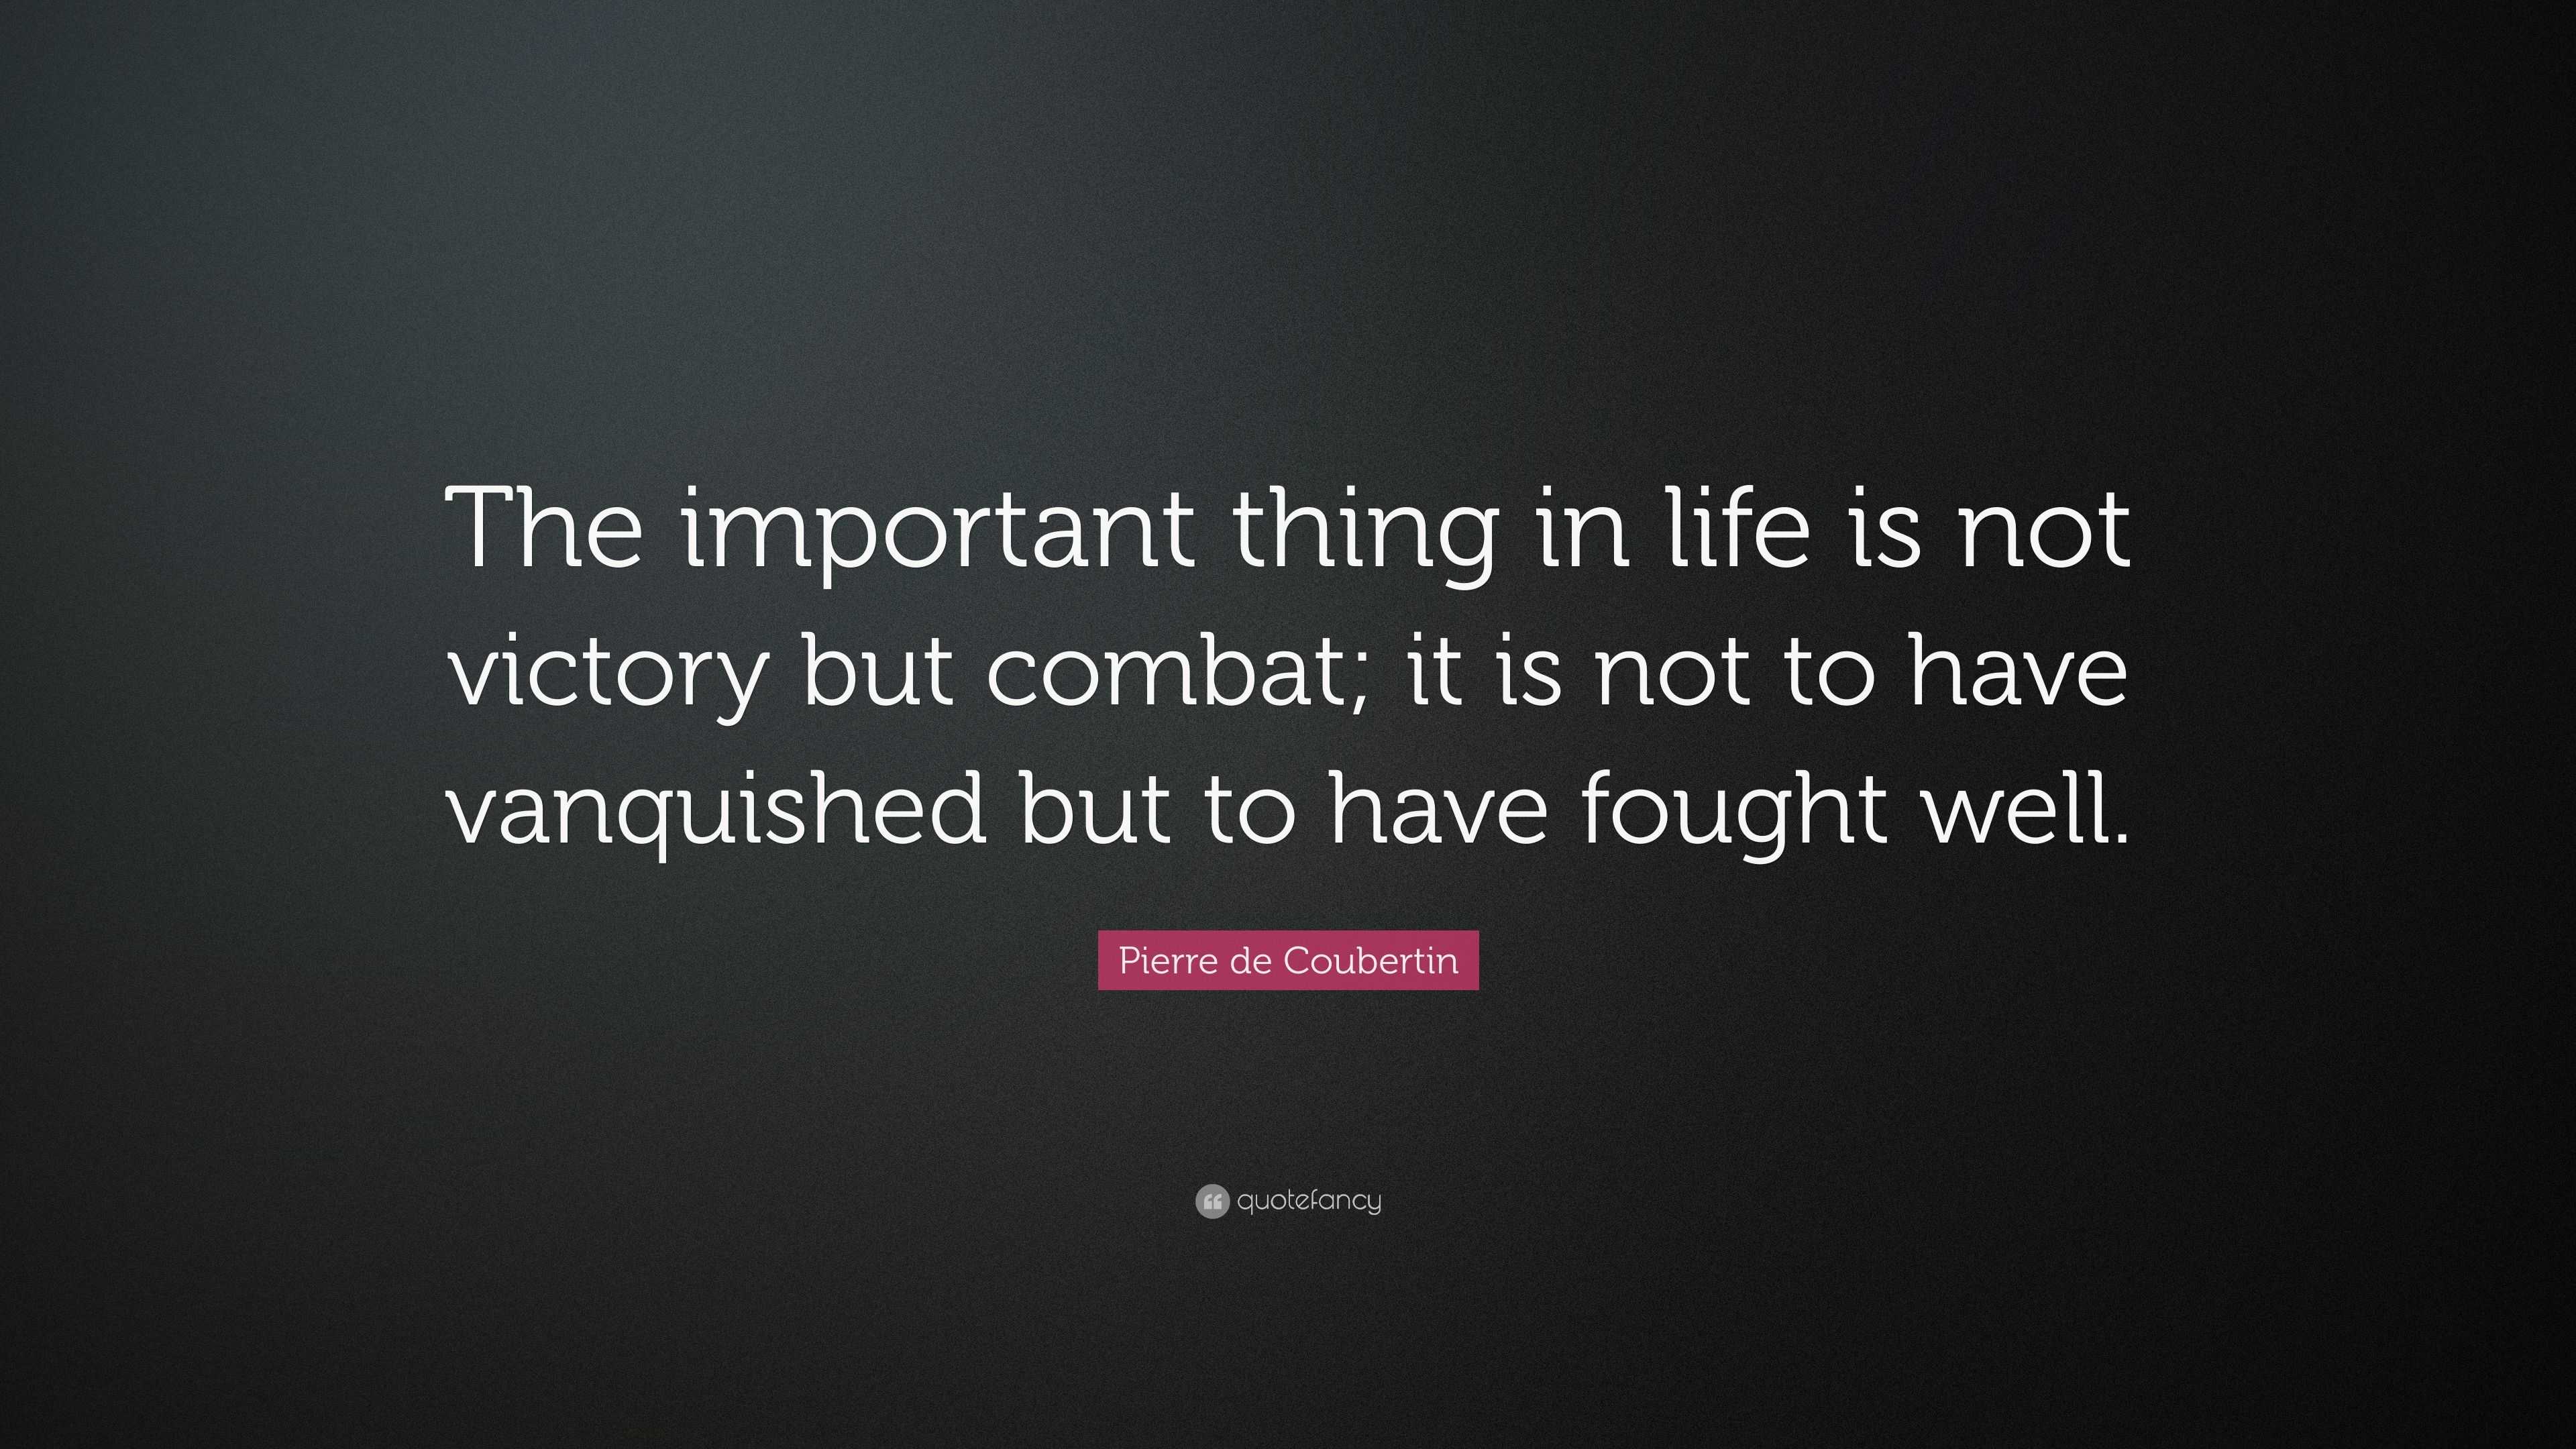 Pierre de Coubertin Quote “The important thing in life is not victory but bat